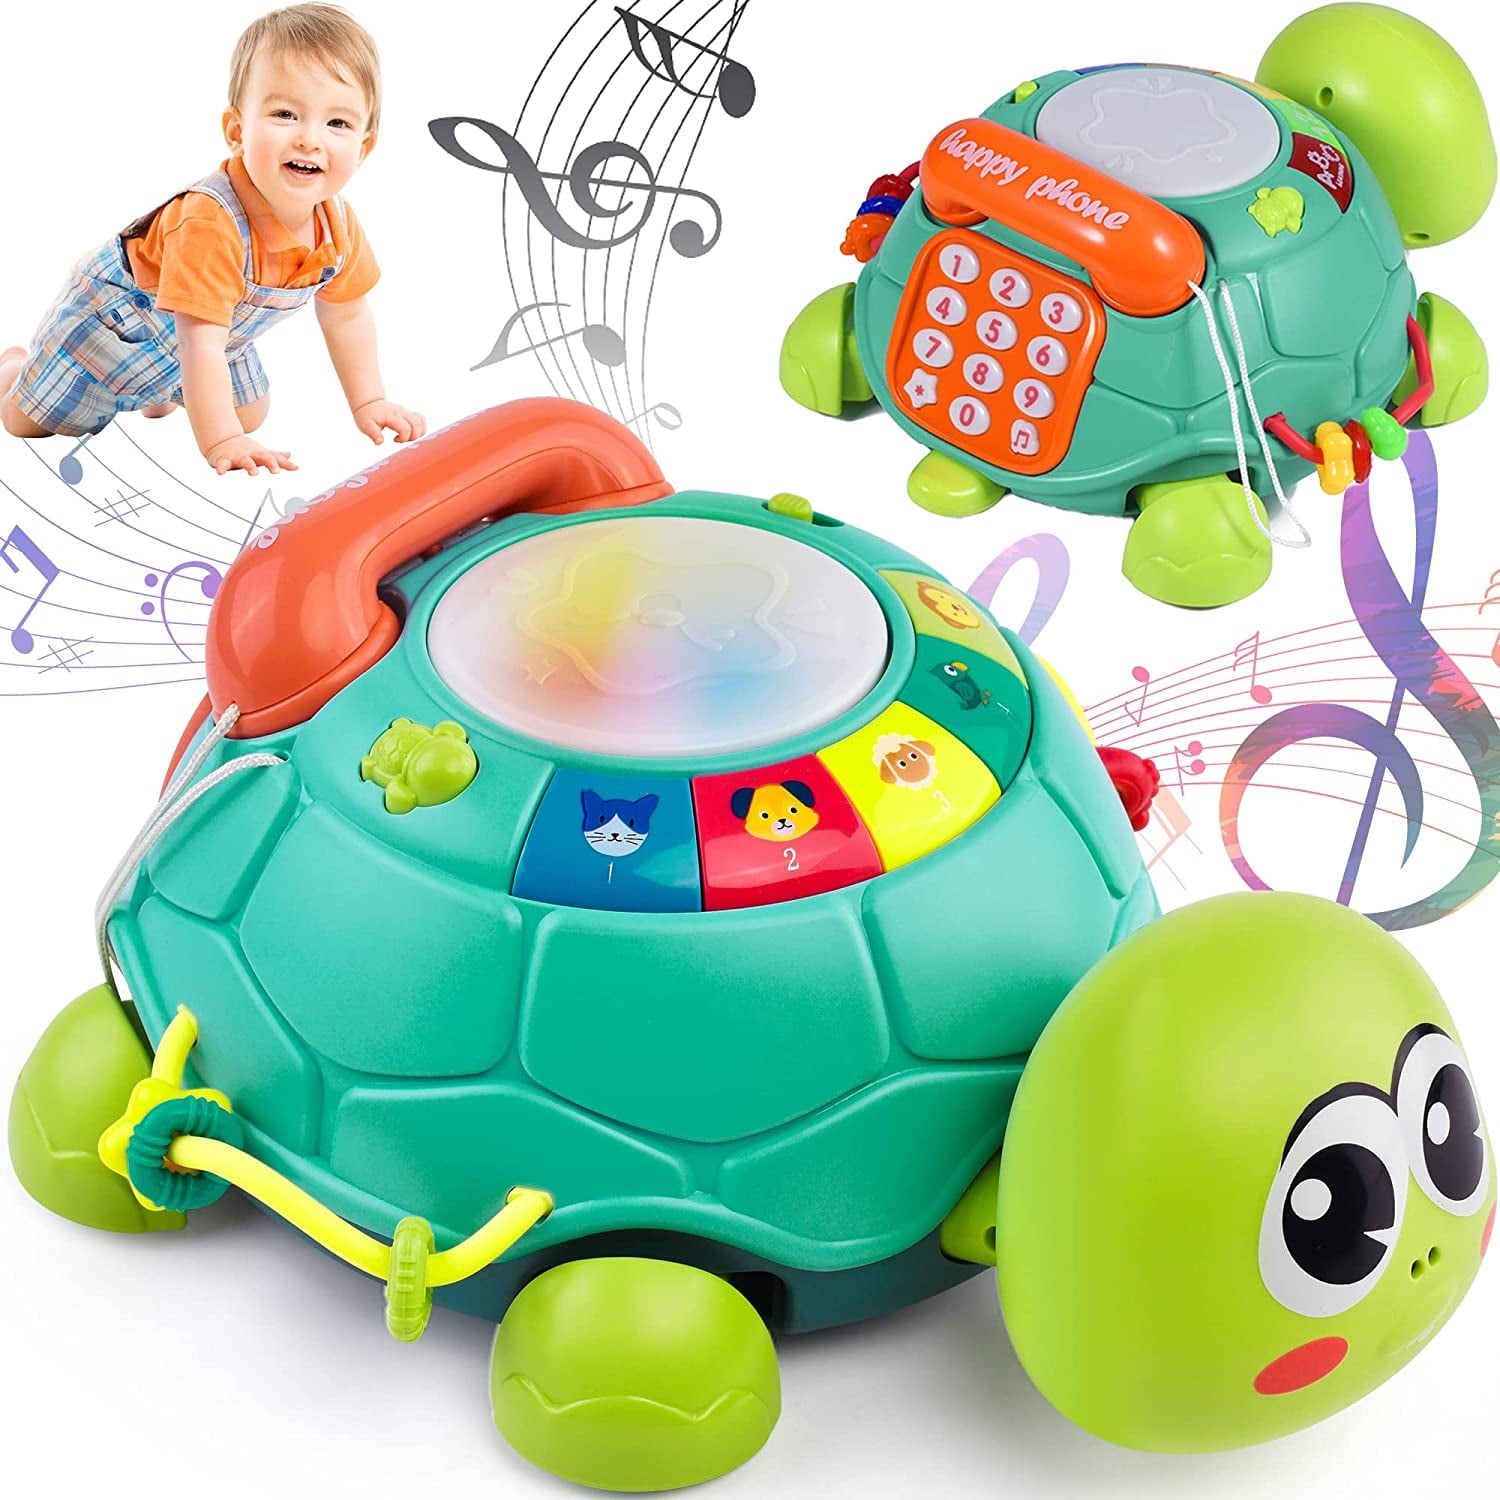 Boxgear Musical Turtle Toy - Baby Crawling Toys for Babies 18+ Months - Learning with Sound, Music, Lights, Phone, Letters, Numbers - for Motor Skills, Cognitive Development, Hand-Eye Coordination